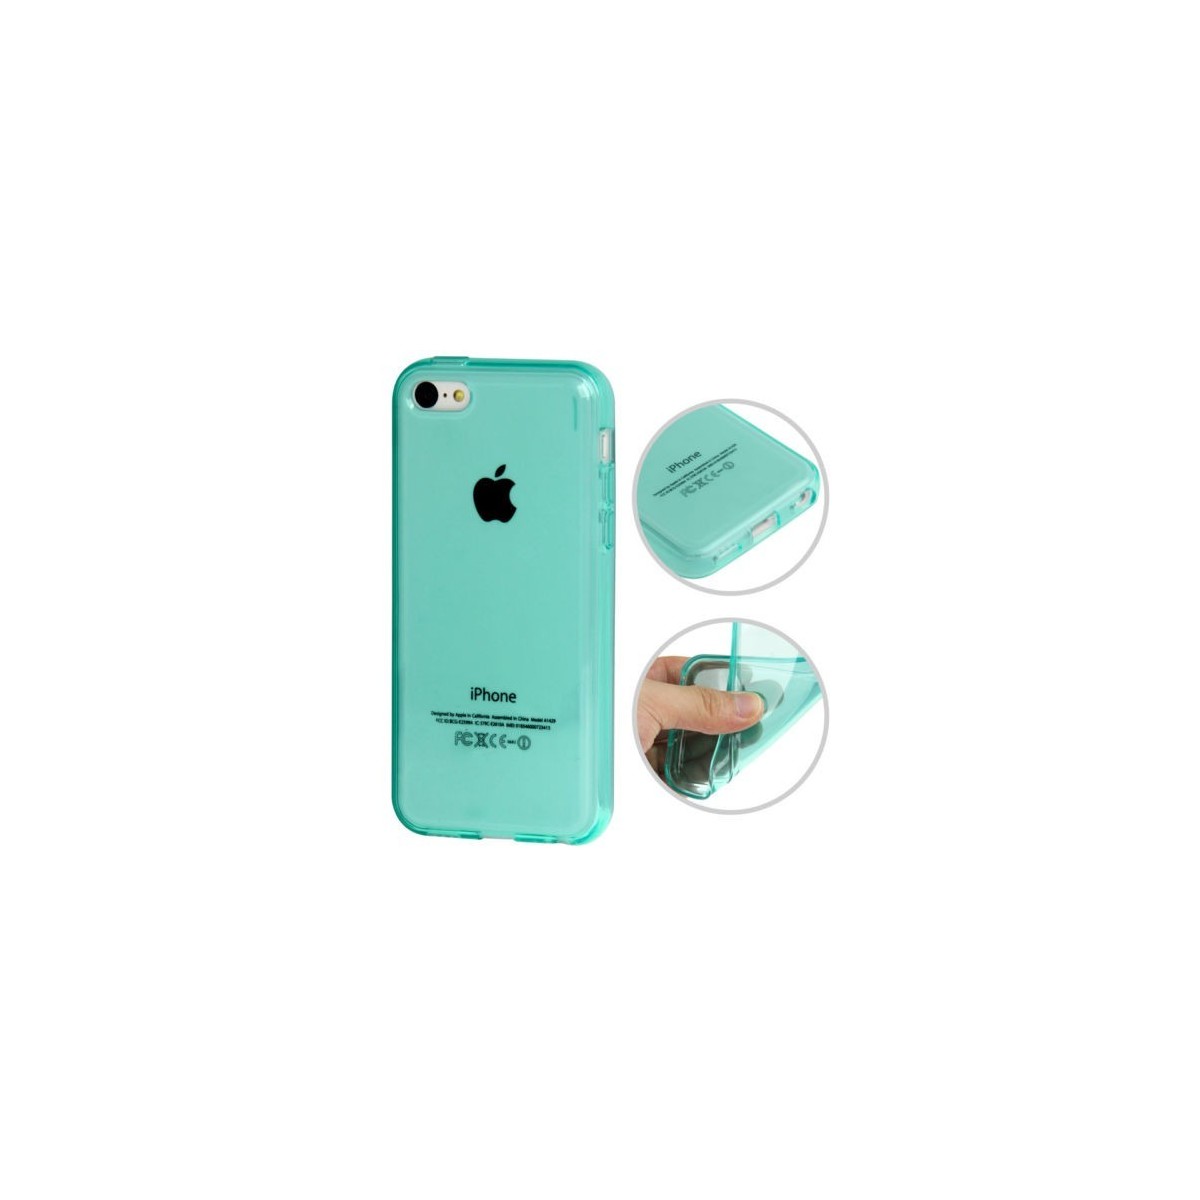 Coque lisse en Silicone Gel (TPU) pour iPhone 5C Turquoise